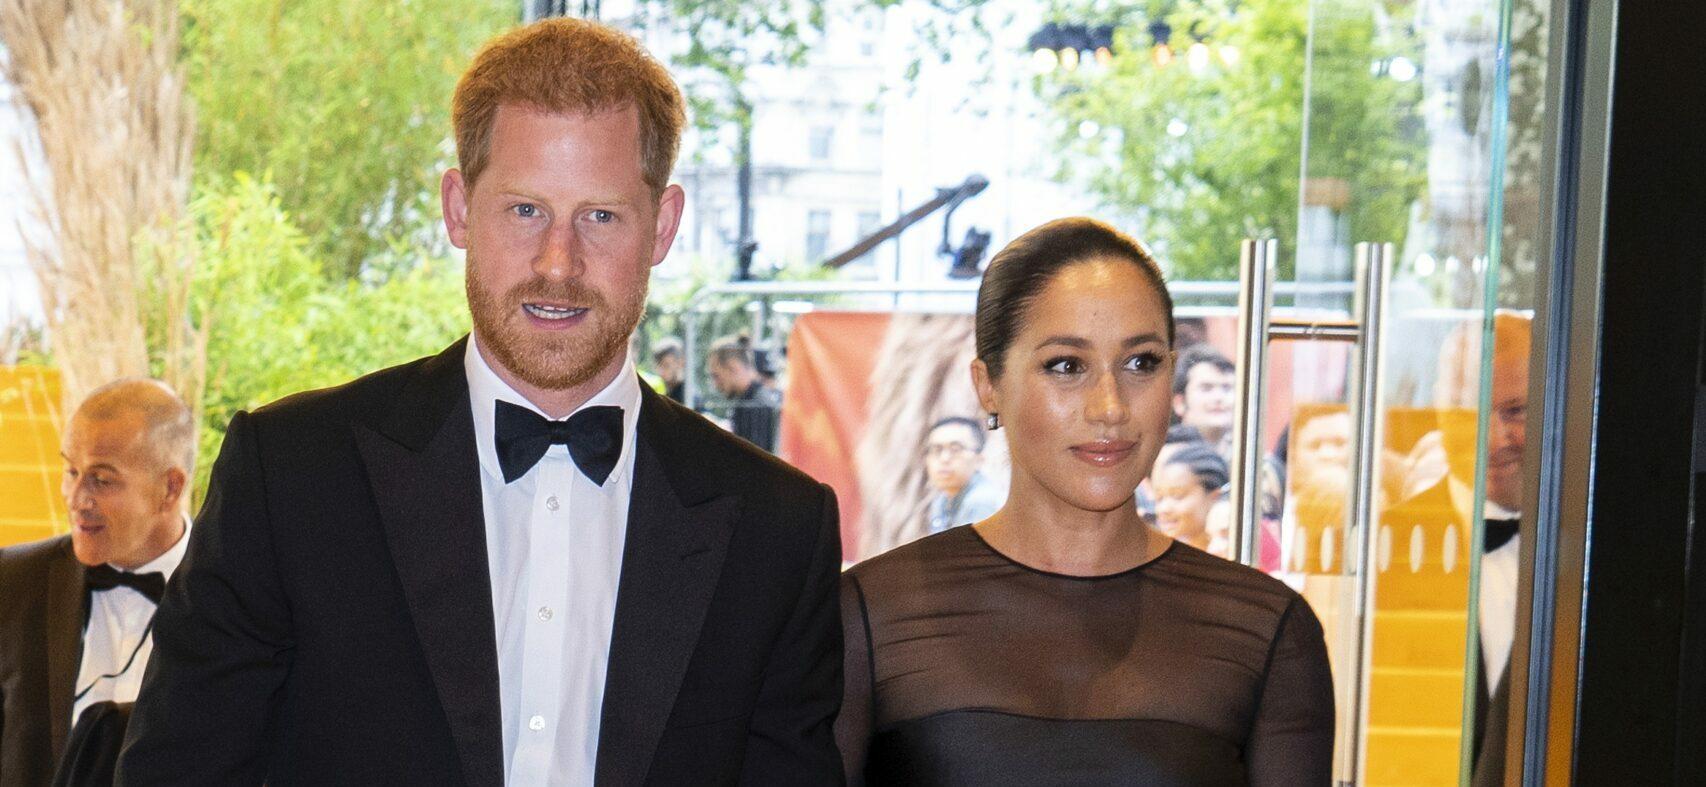 Meghan Markle’s Upcoming 40th Birthday Plans Are Underway